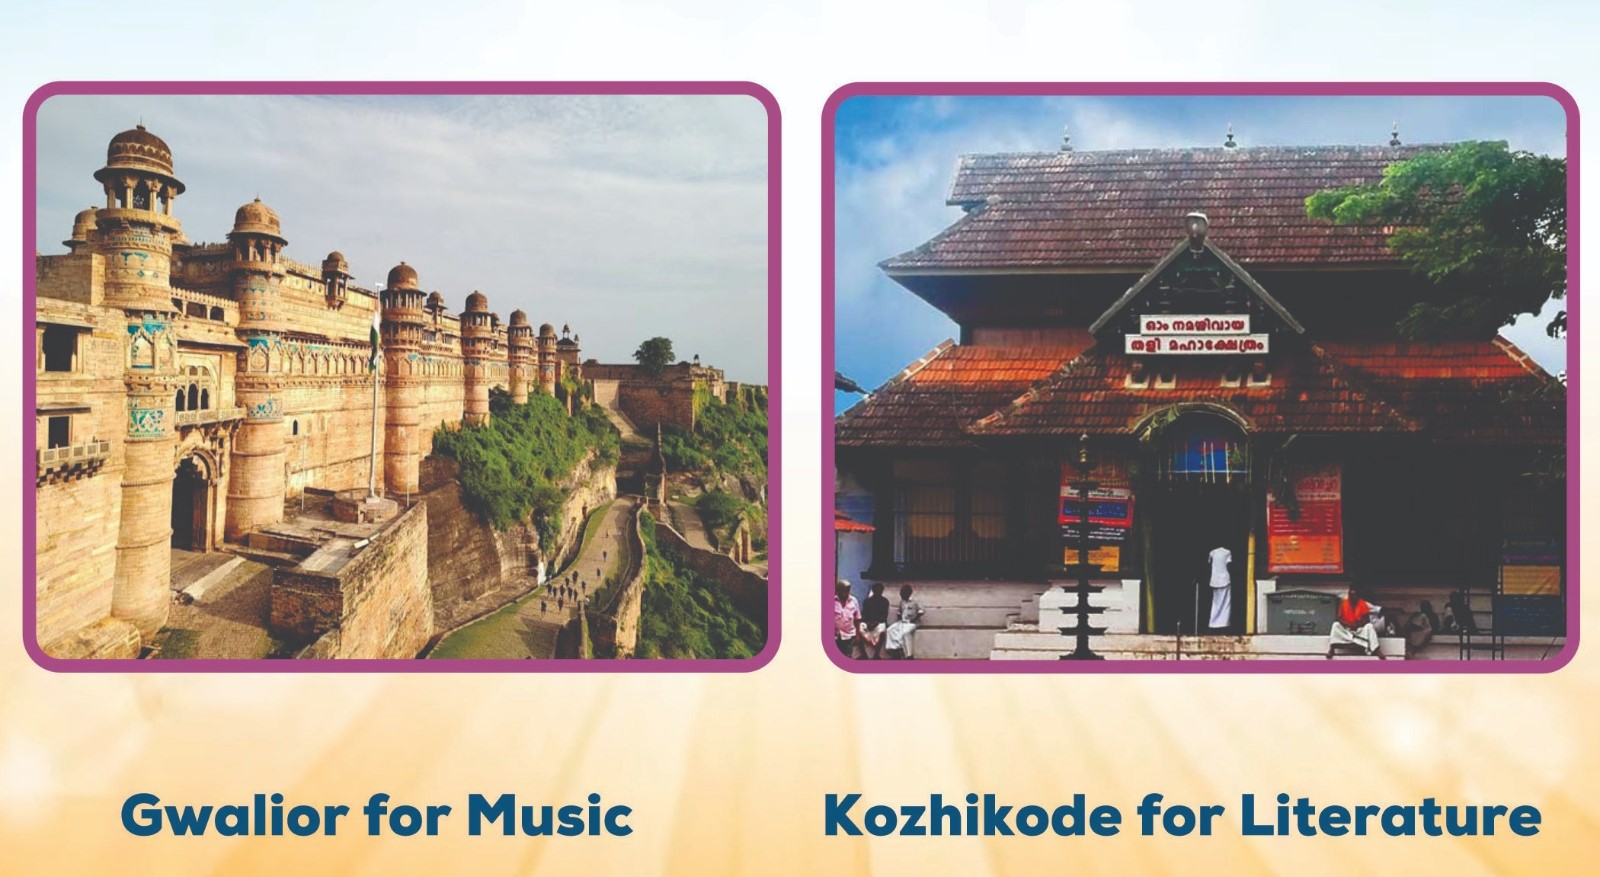 Kozhikode and Gwalior join UNESCO Creative Cities Network as Cities of Literature and Music